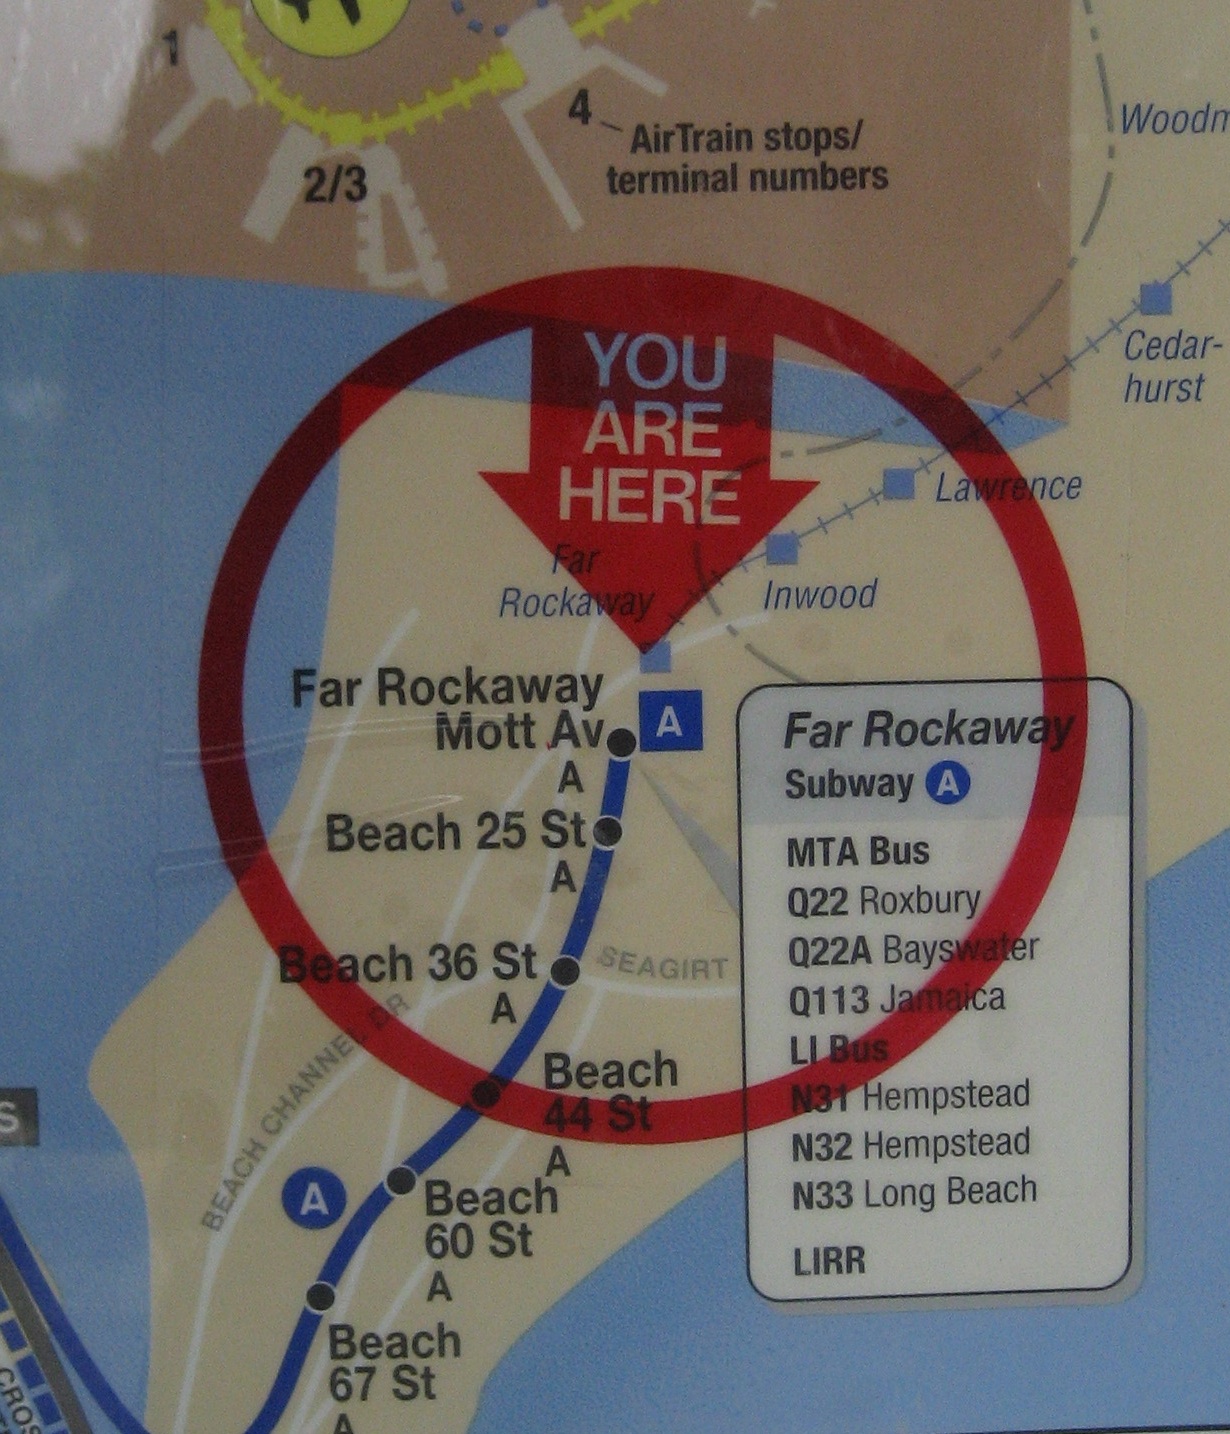 [You+are+here+-+far+rockaway+rotated+cropped.jpg]